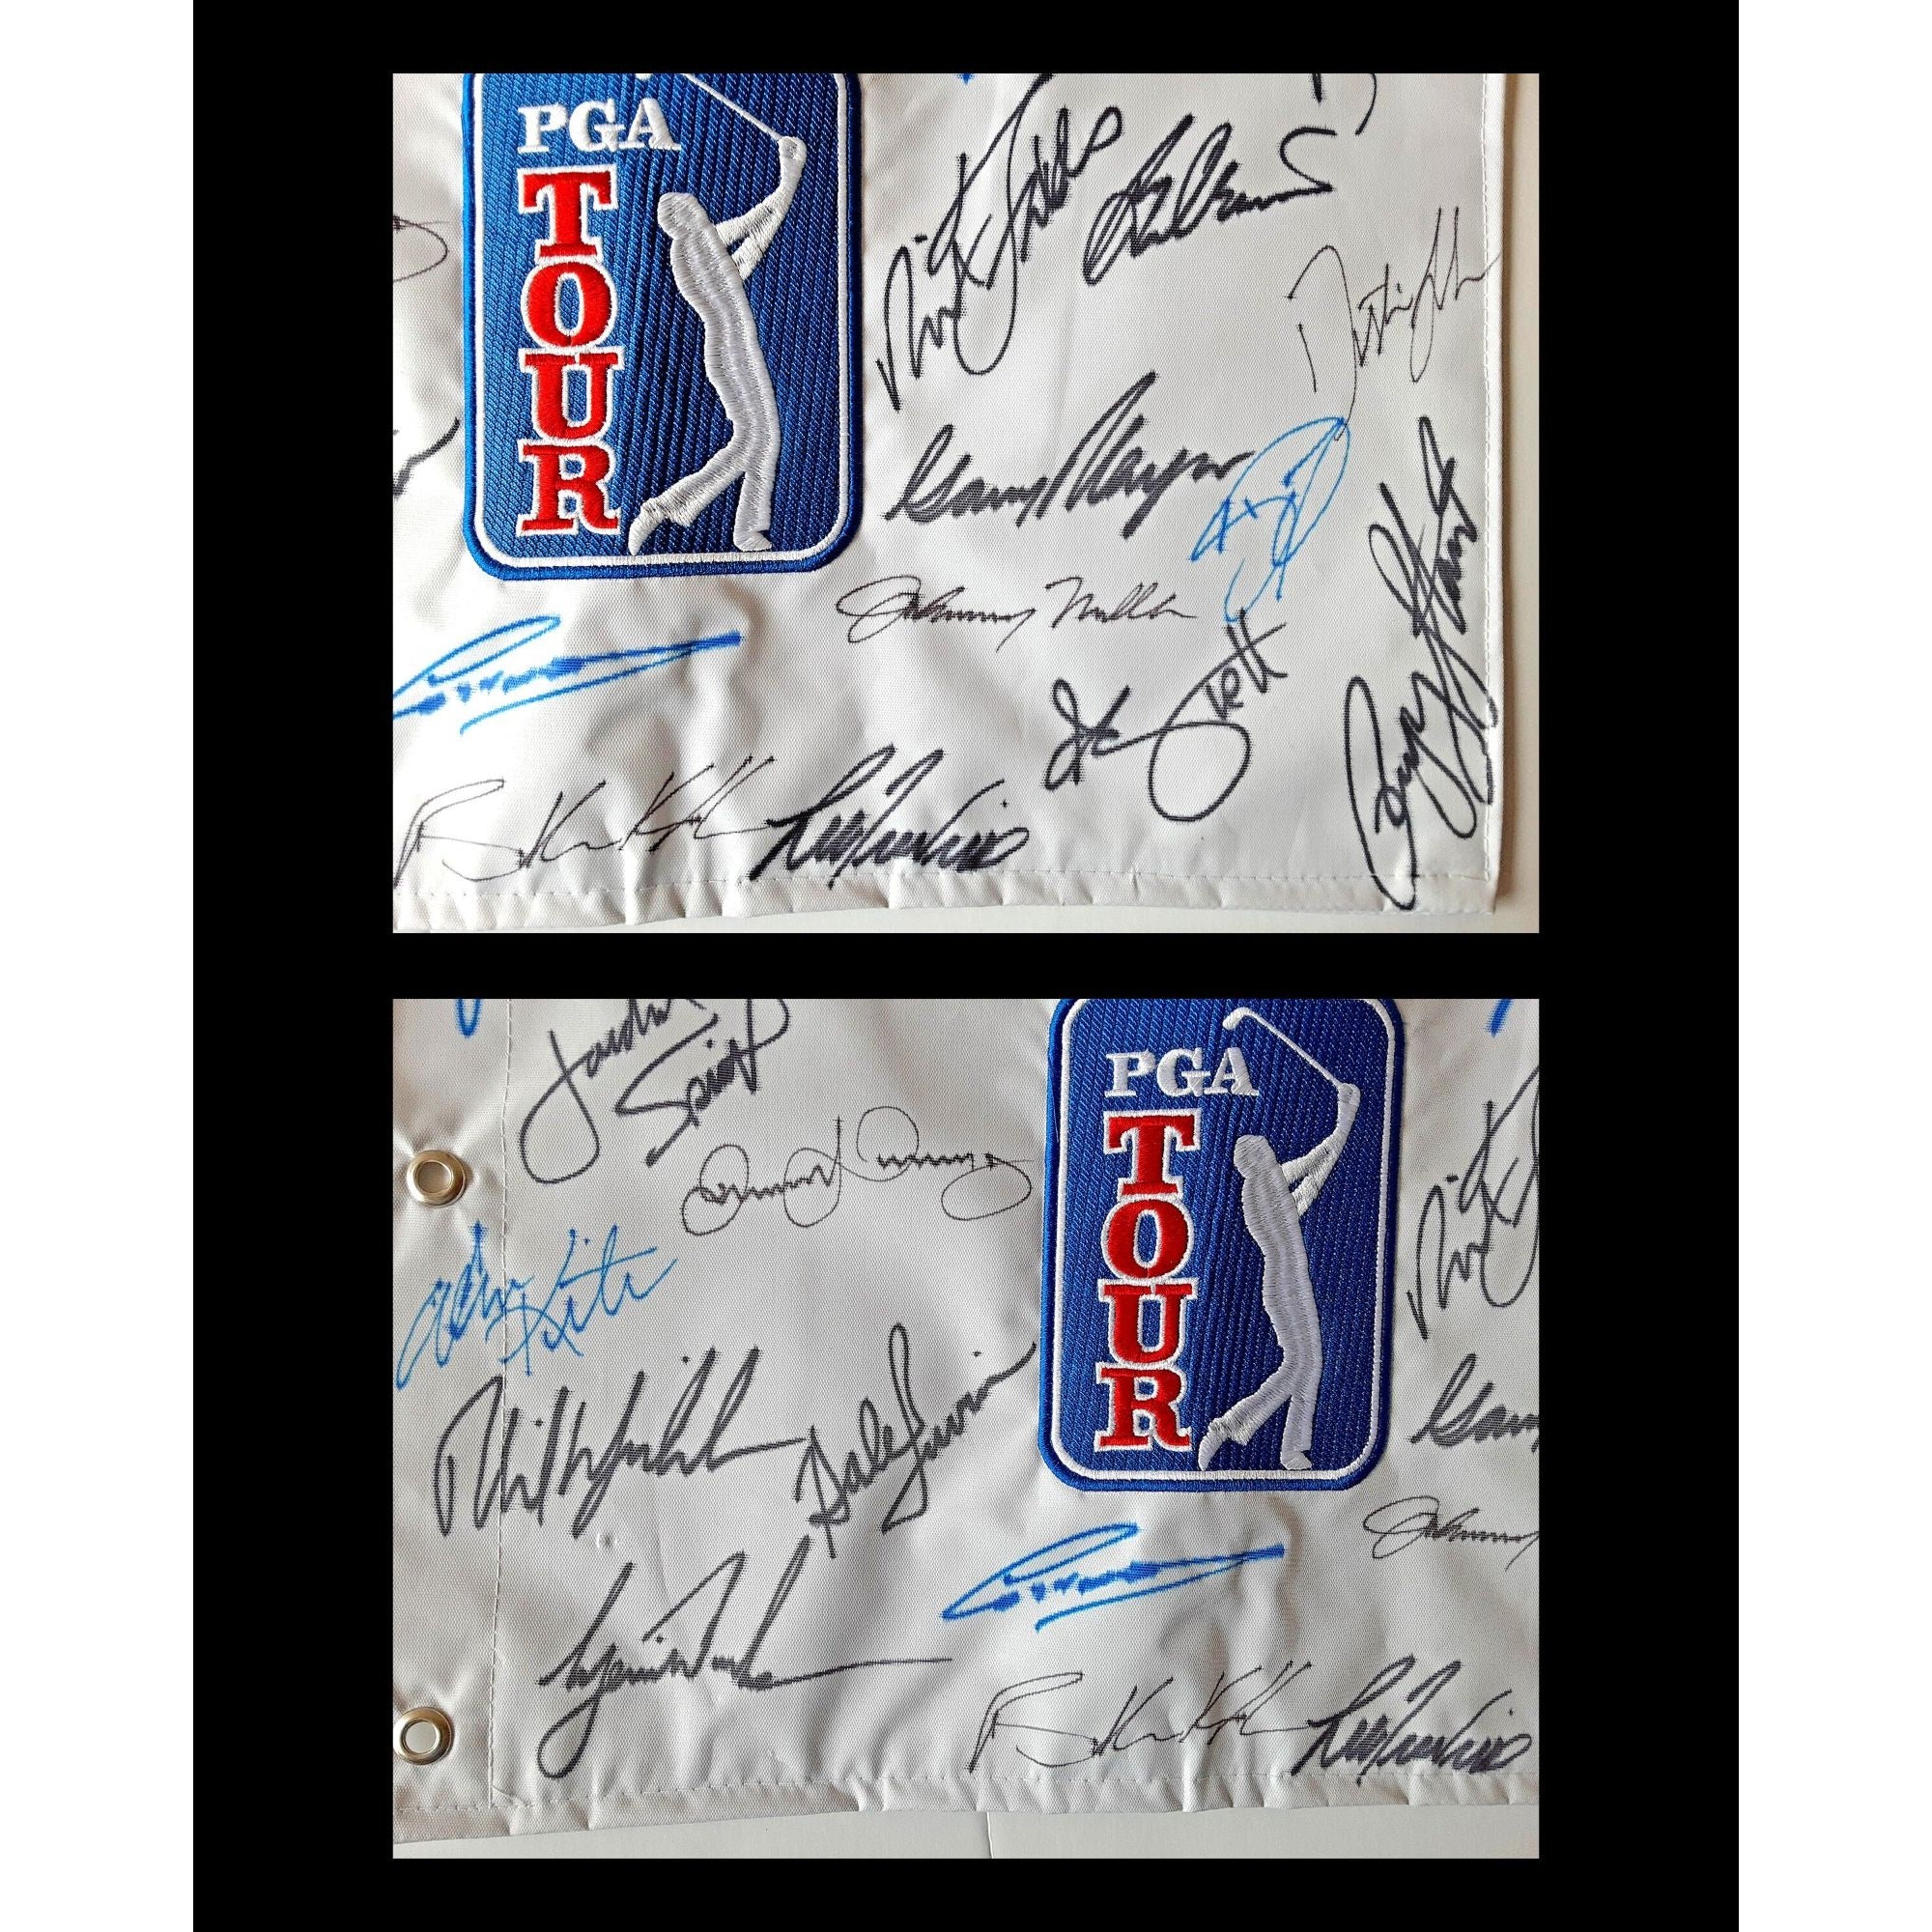 Phil Mickelson, Arnold Palmer, Johnny Miller, Tiger Woods signed PGA golf flag with proof